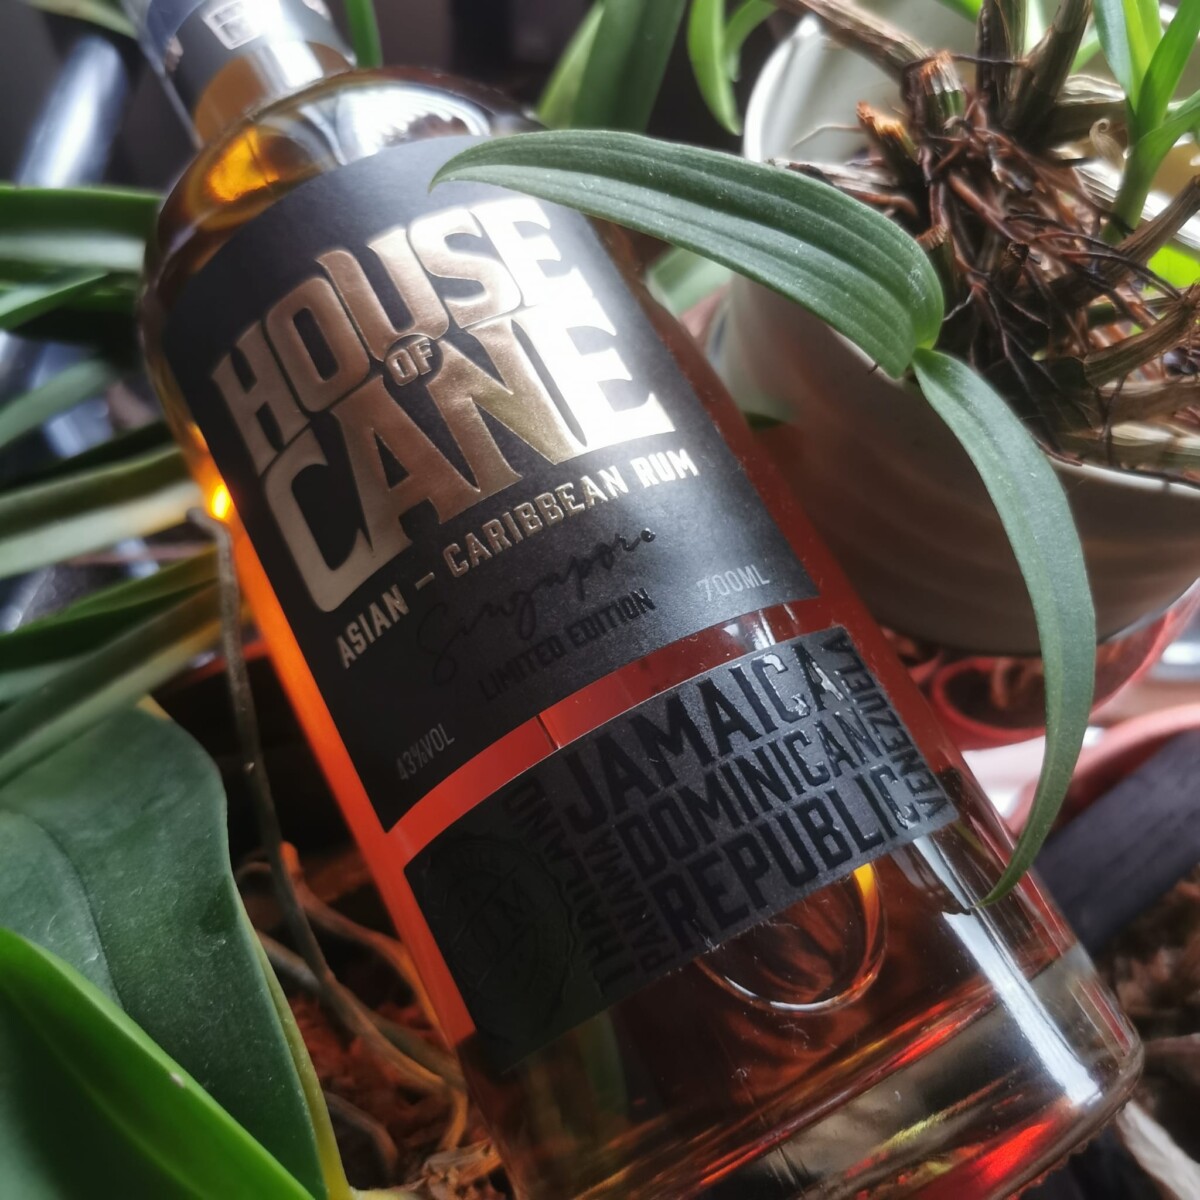 House of Cane Rum